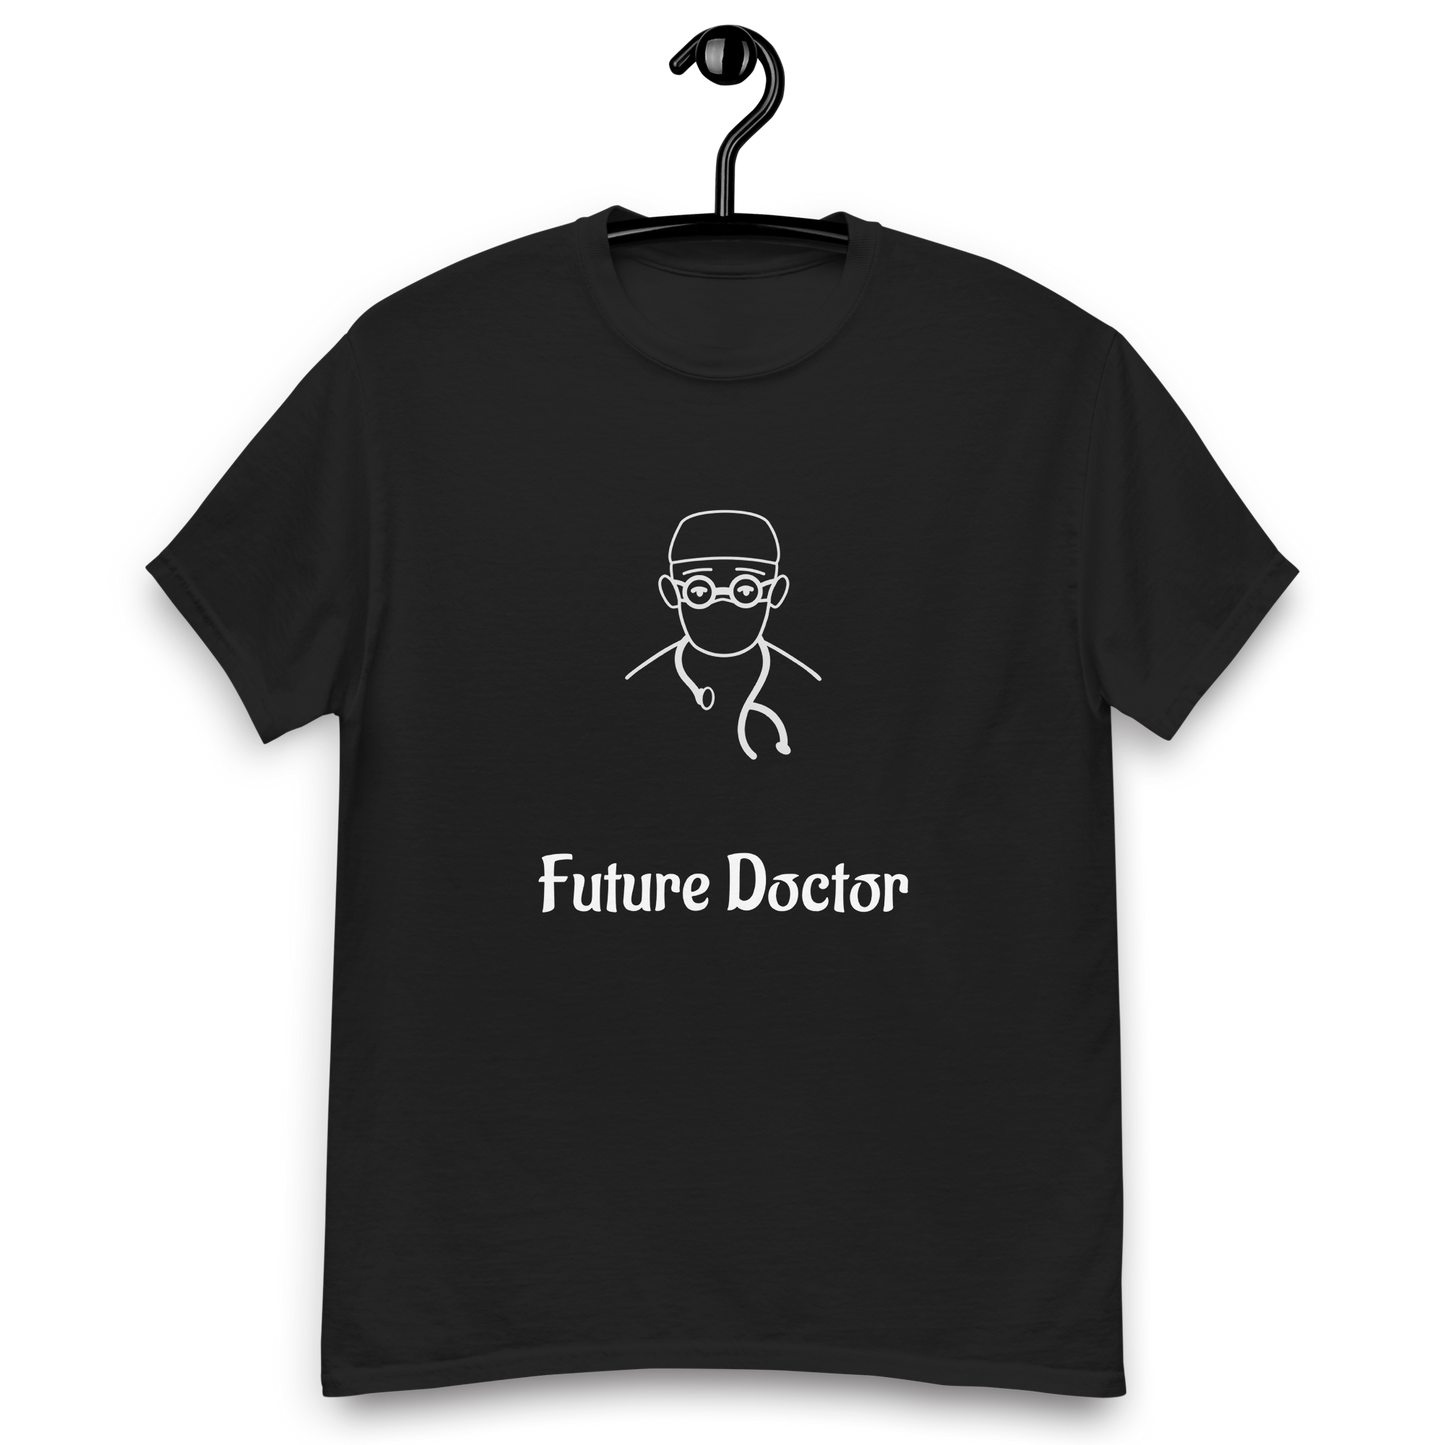 Life time gift for any Future profession - Send your custom text for your profession